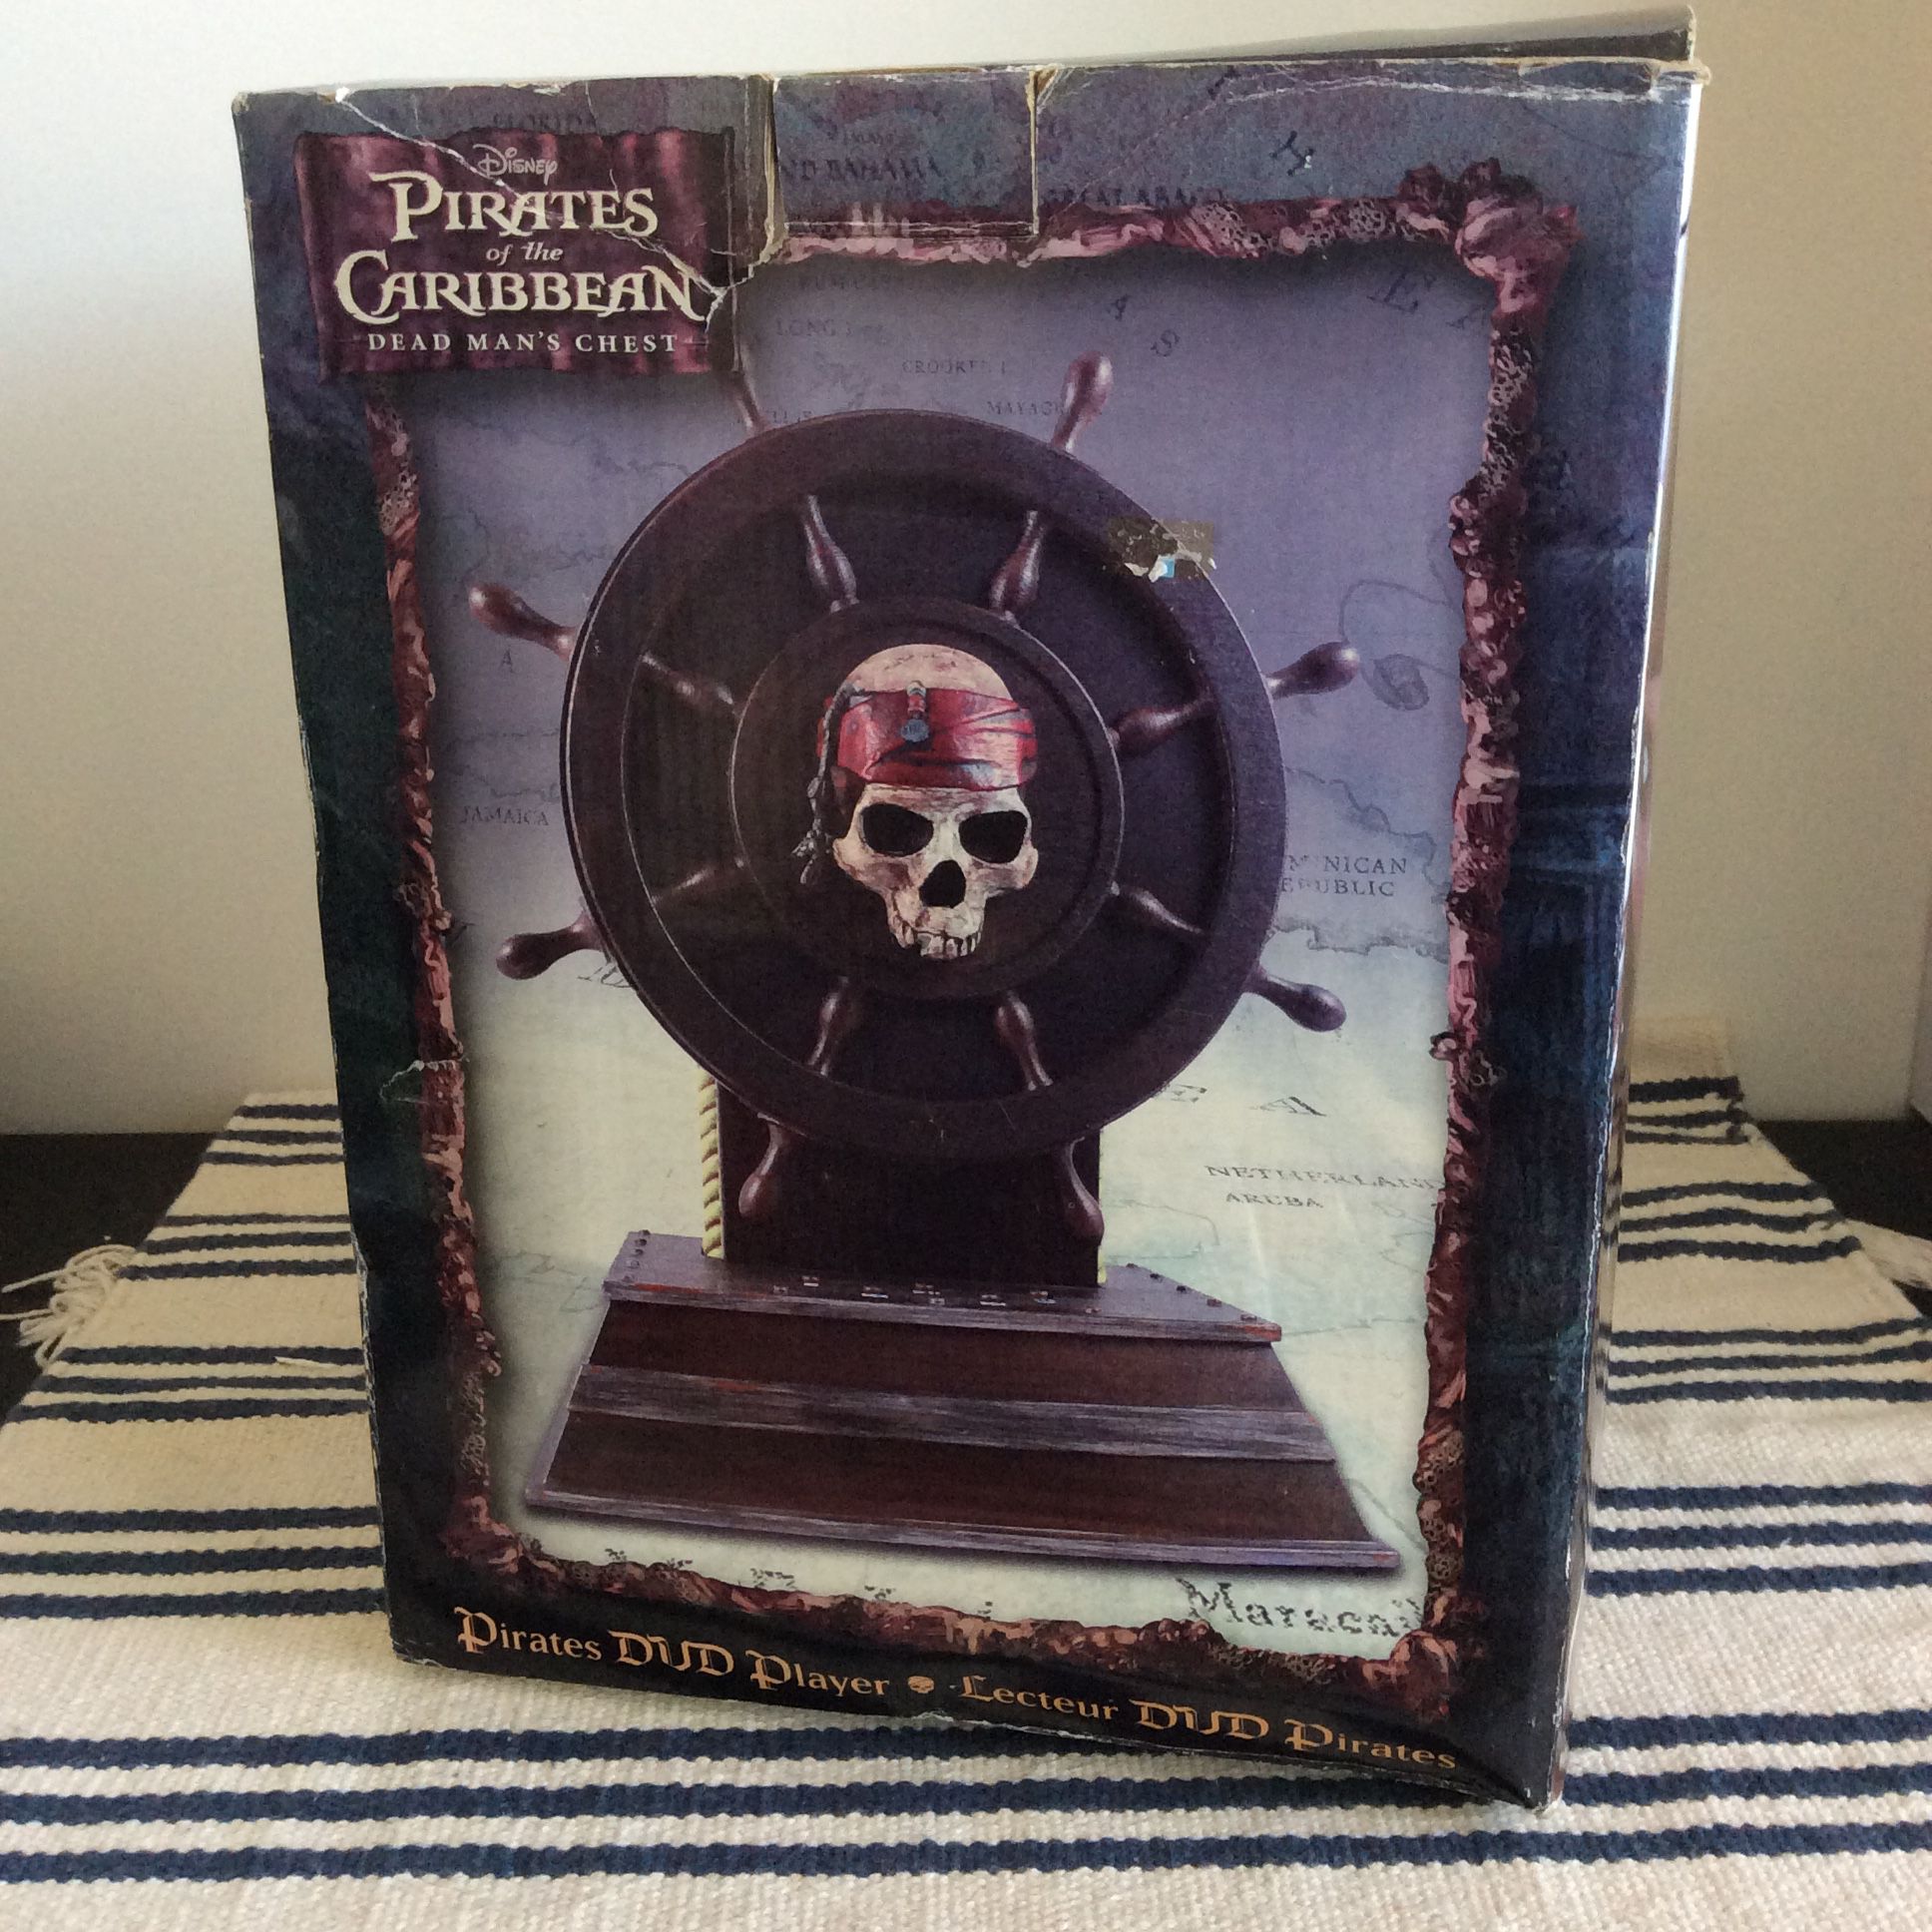 Disney Pirates of the Caribbean DVD Player CD Audio -OPEN BOX TESTED MODEL PC700